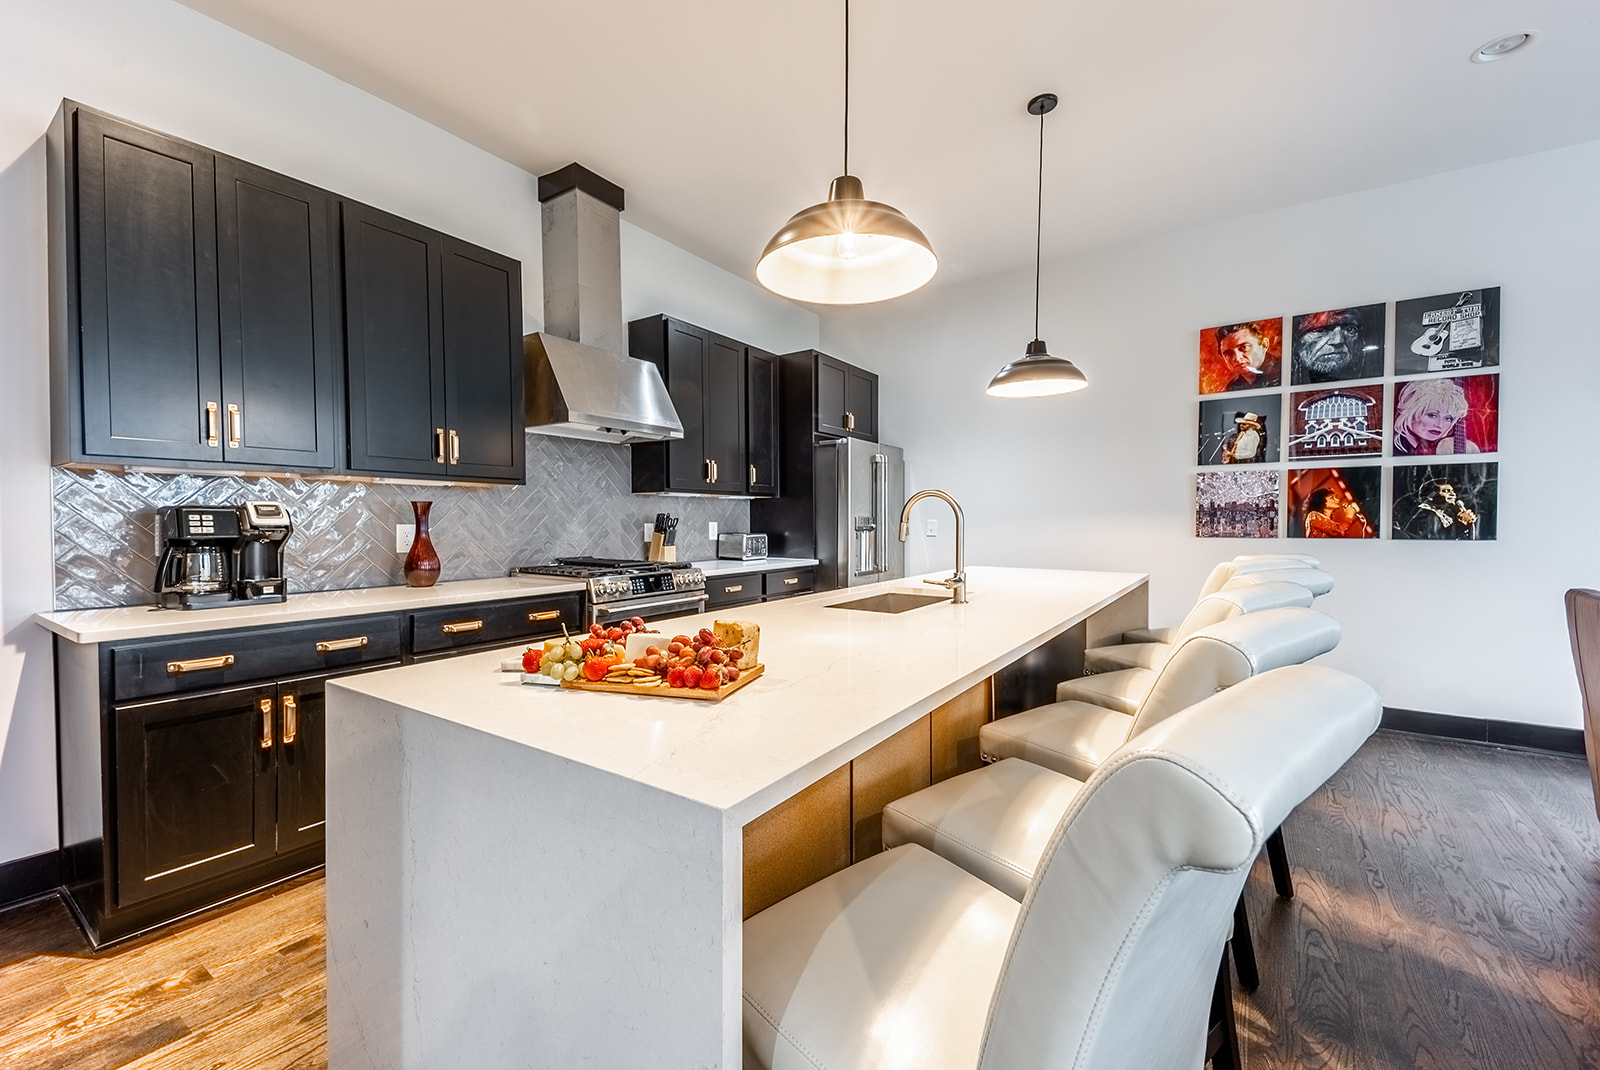 1st unit: Gourmet style kitchen fully stocked with your basic cooking essentials. Includes stainless steel appliances and breakfast bar seating.